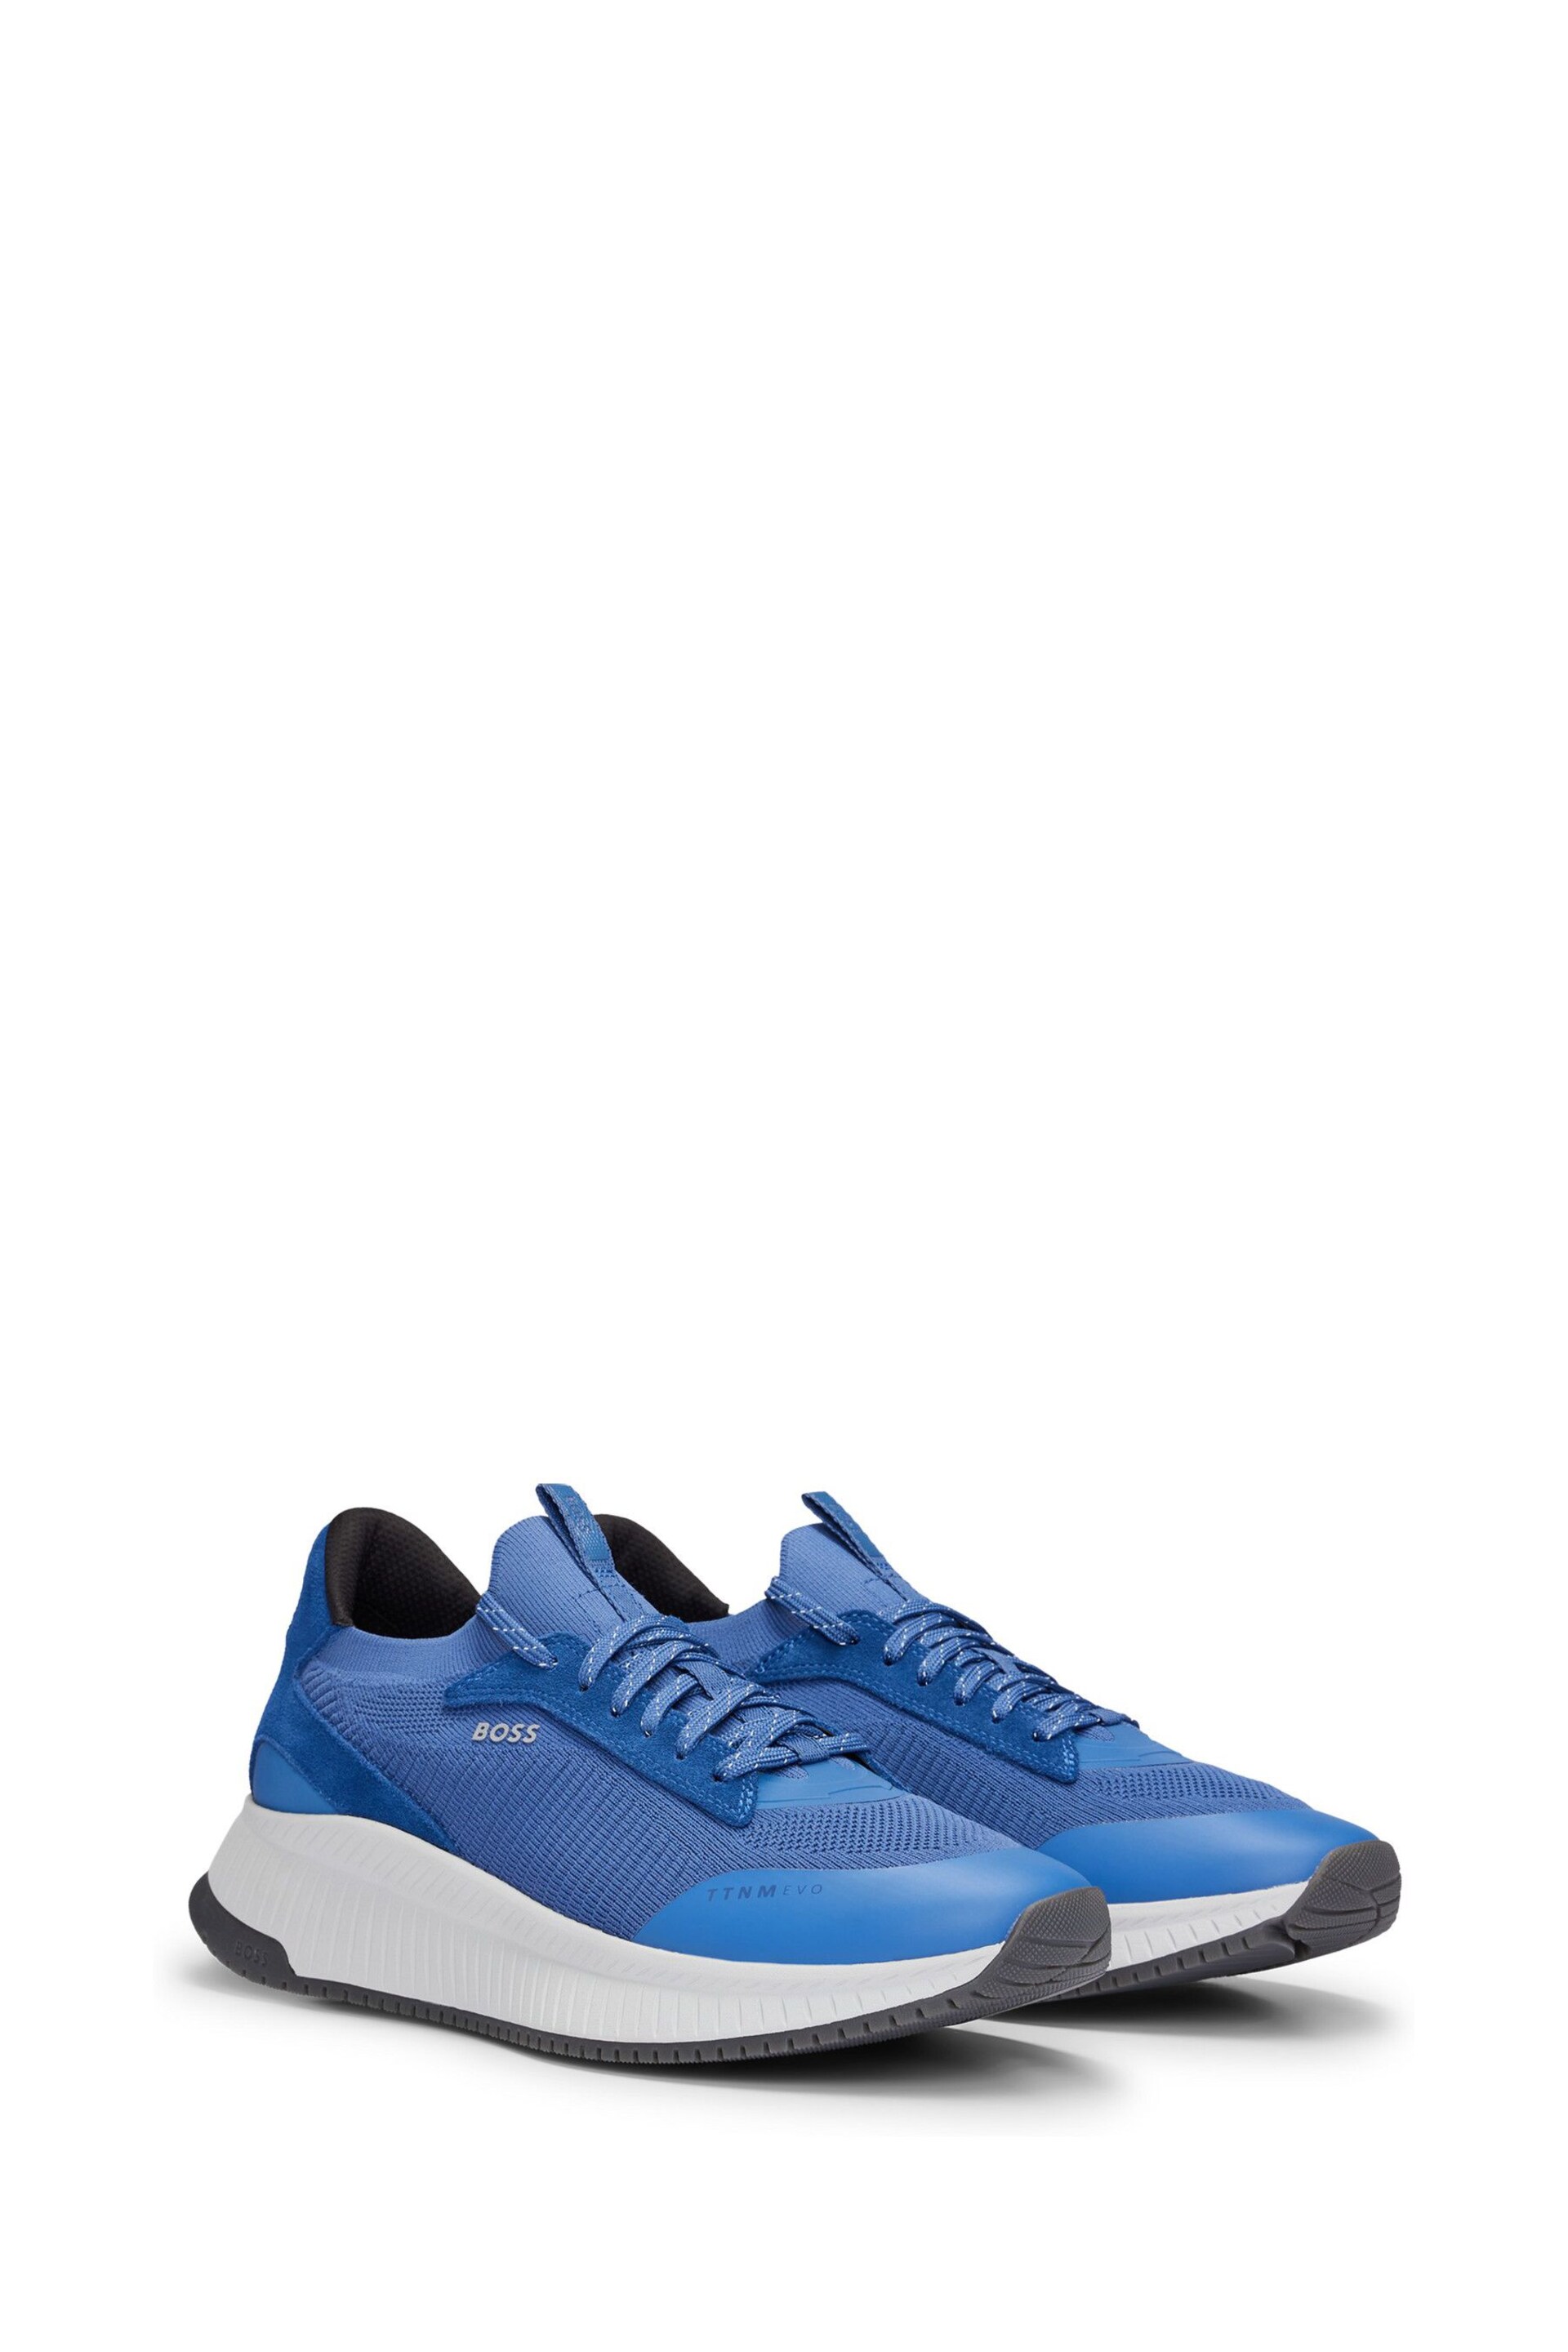 BOSS Blue Chunky Sports Knitted Upper Trainers - Image 2 of 4